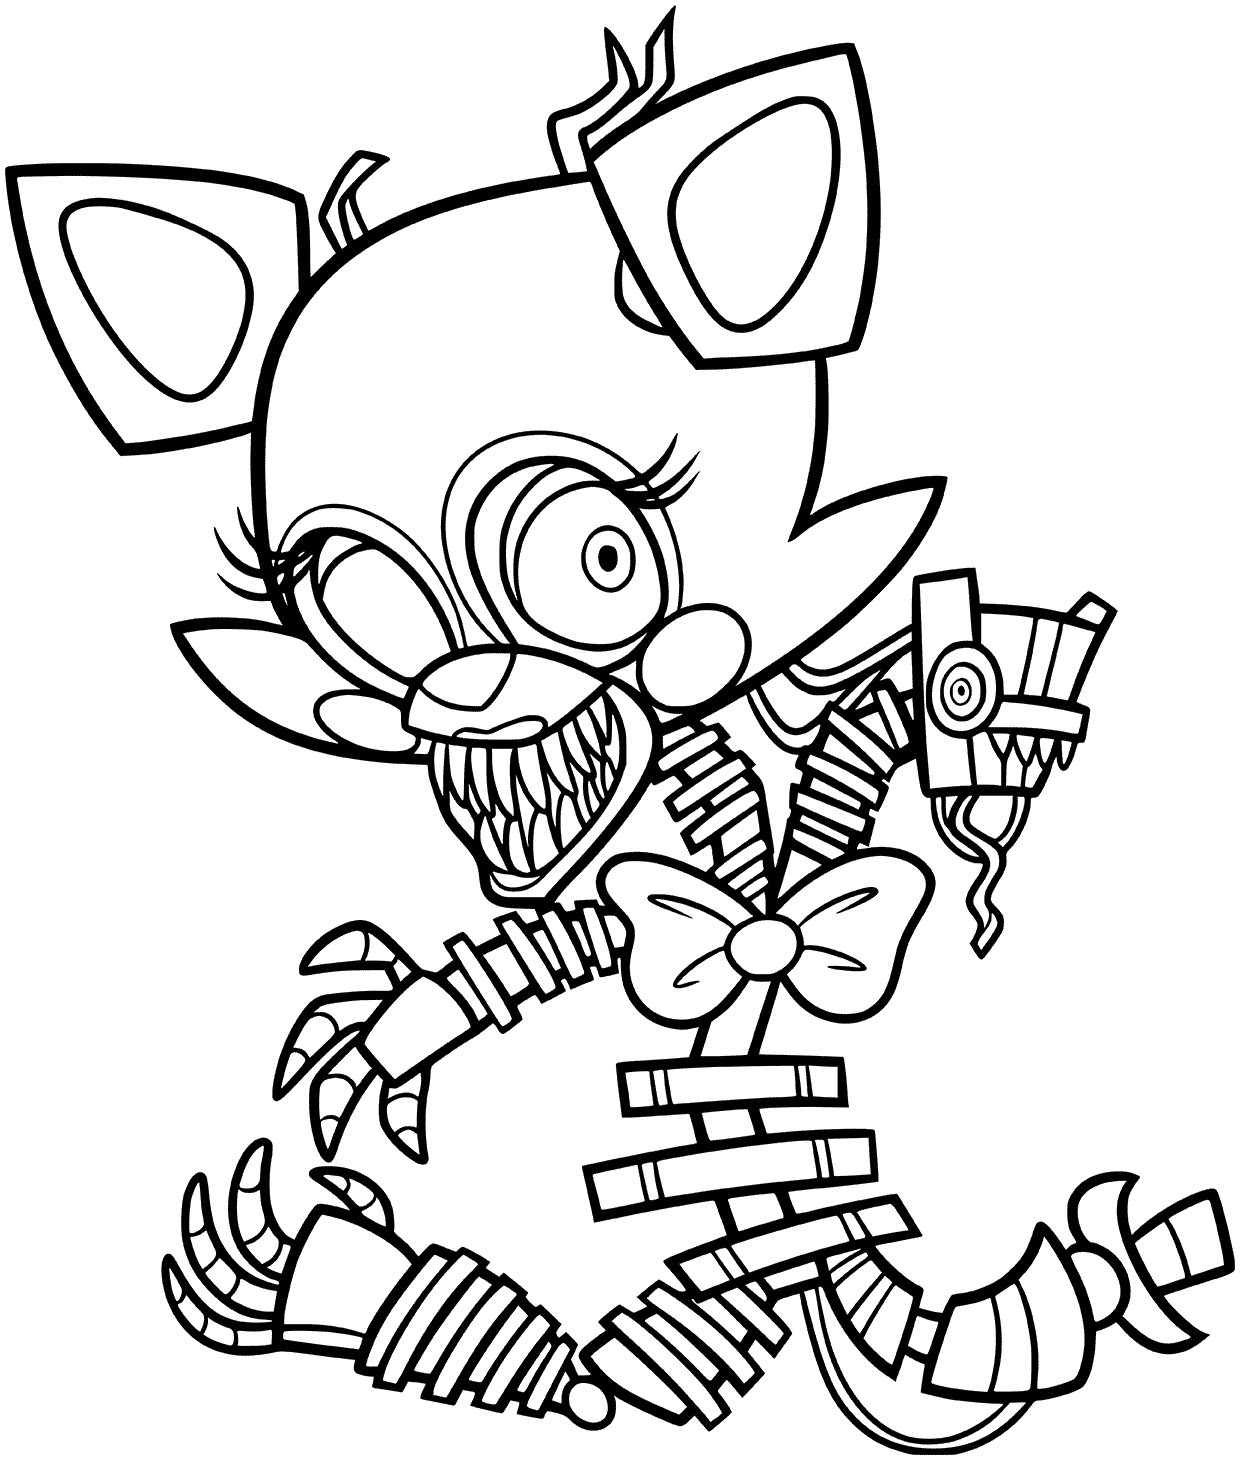 Golden Freddy Coloring Pages At GetColorings Free Printable Colorings Pages To Print And Color